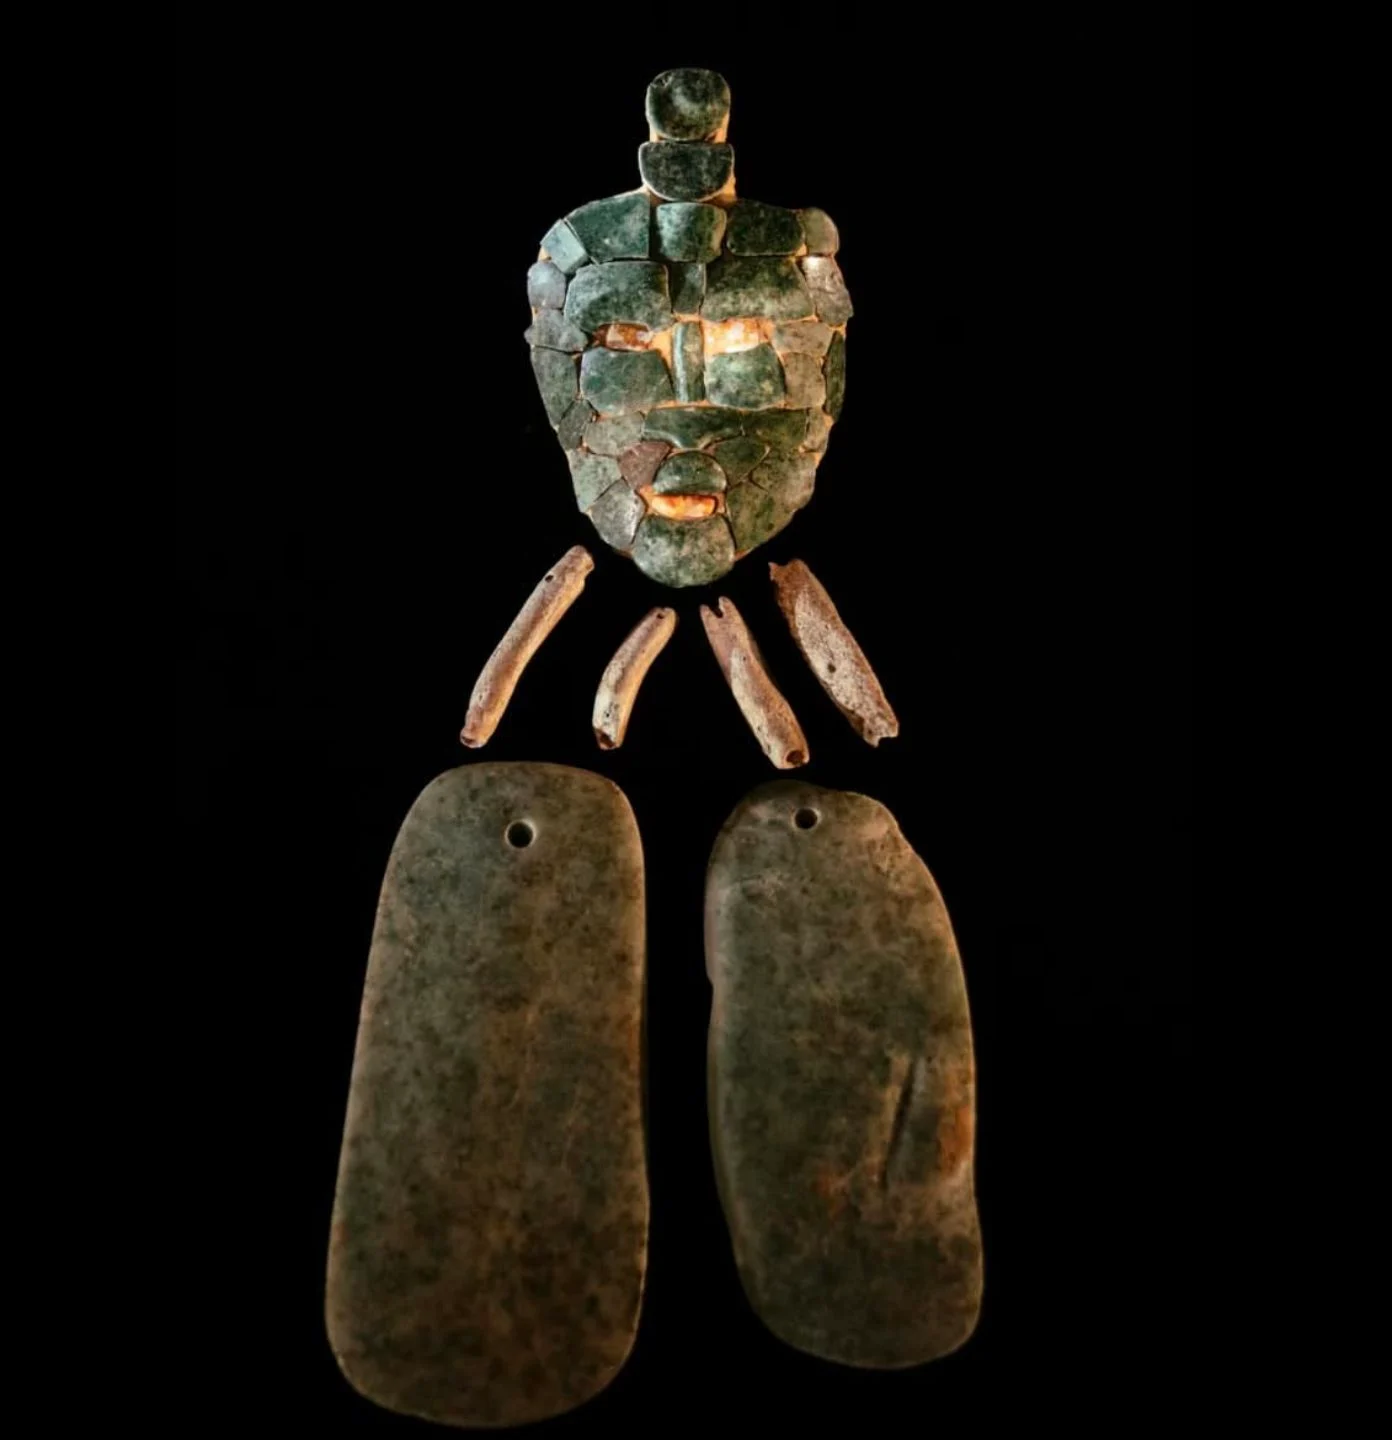 Undisturbed tomb of an unknown Maya king with jade mask discovered in Guatemala 1